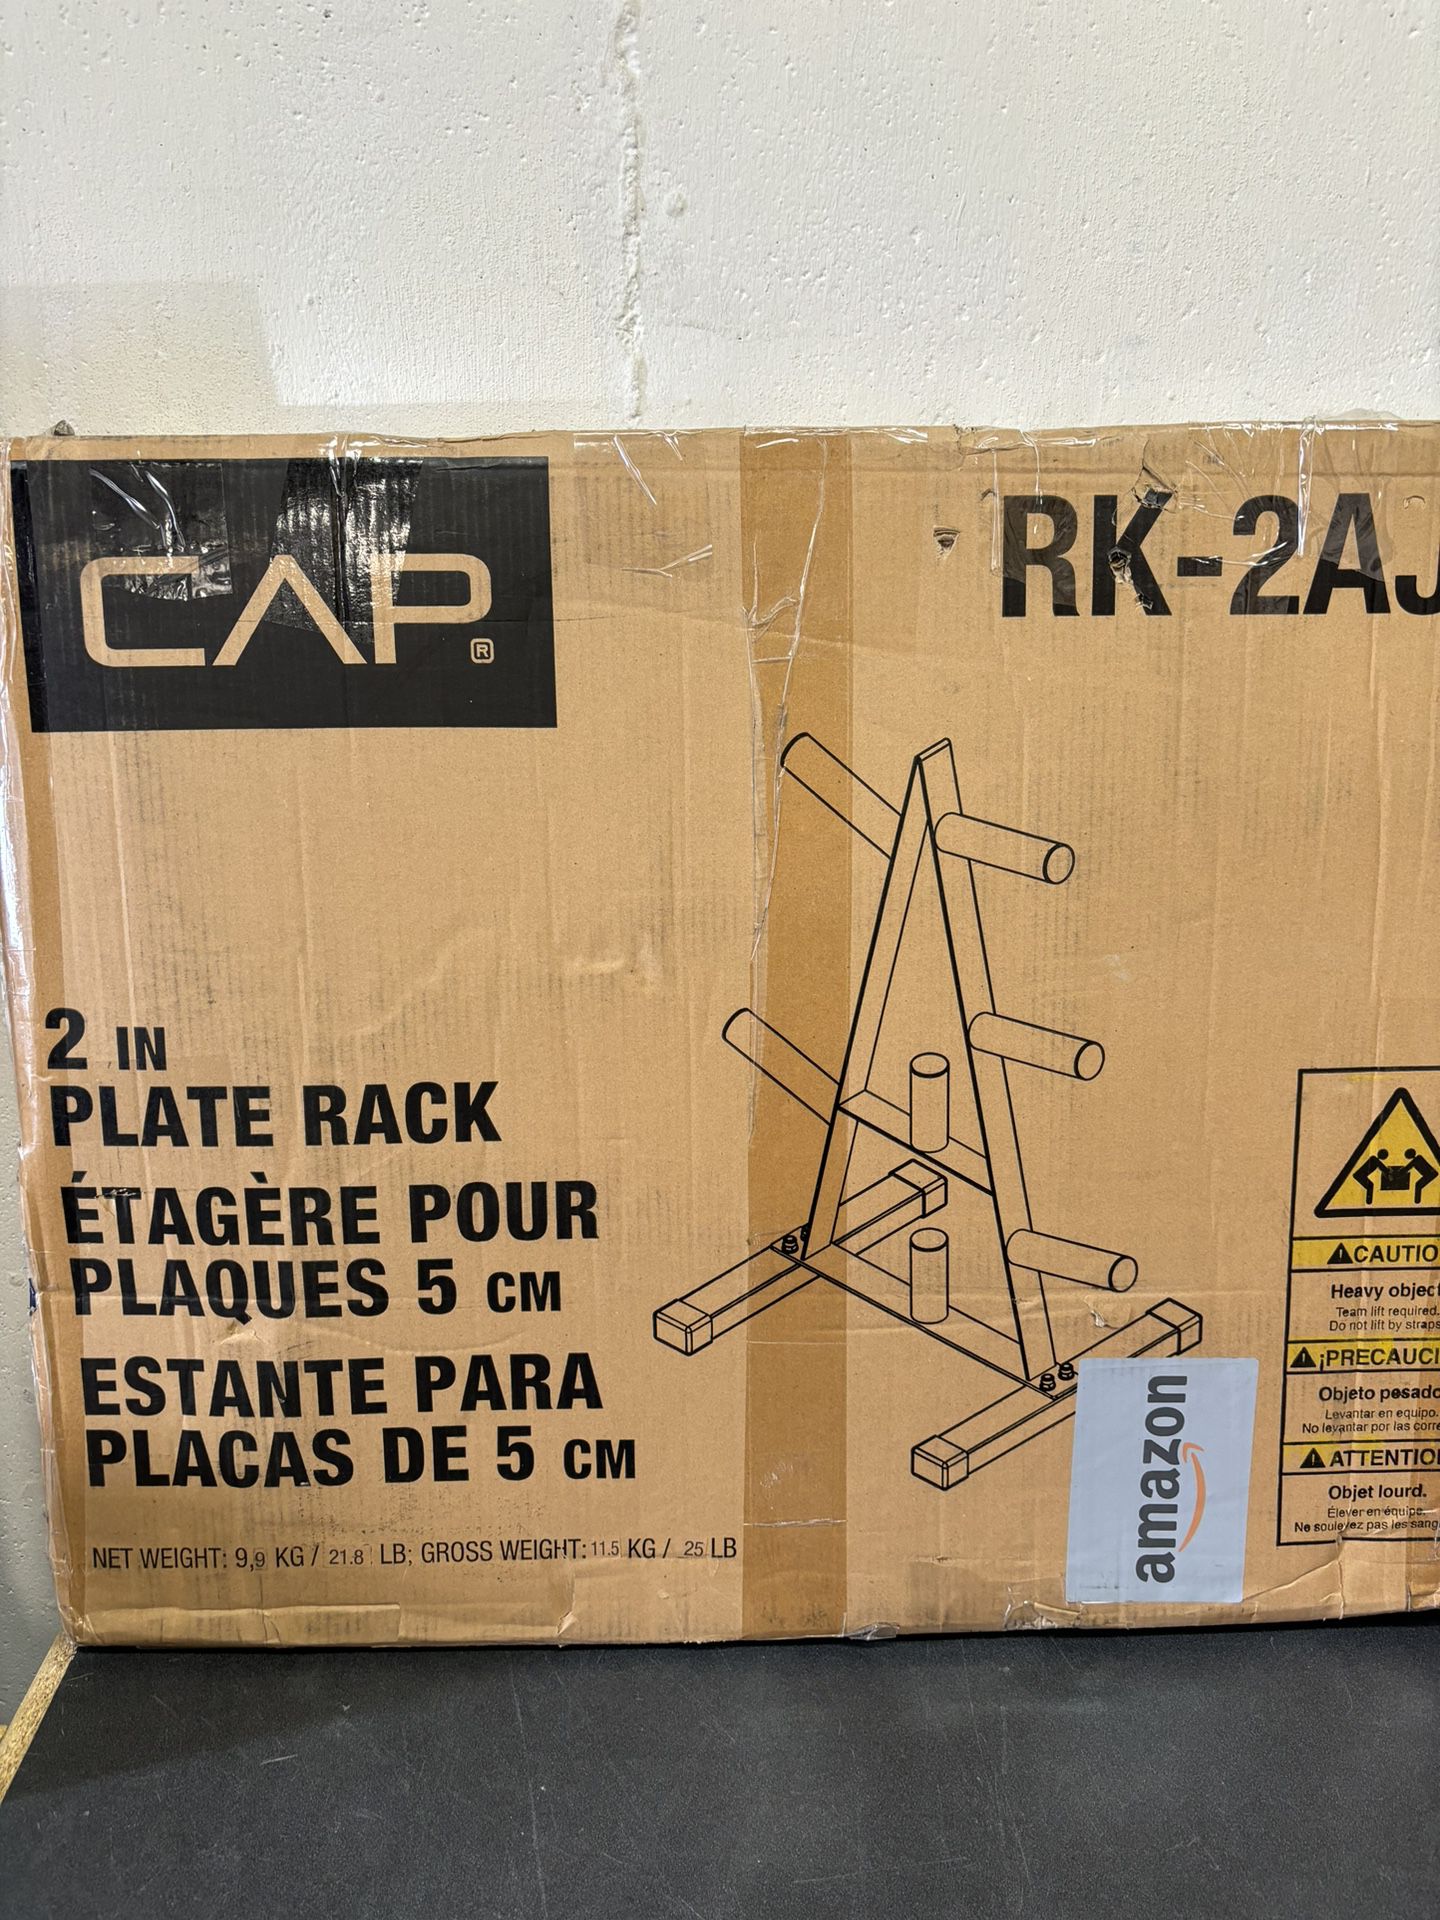 CAP Barbell Olympic 2-Inch Plate Rack Brand New $50 Cash or E-pay RI Daily Deals Message for appt. https://offerup.com/redirect/?o=aHR0cHM6Ly93d3cuZmF